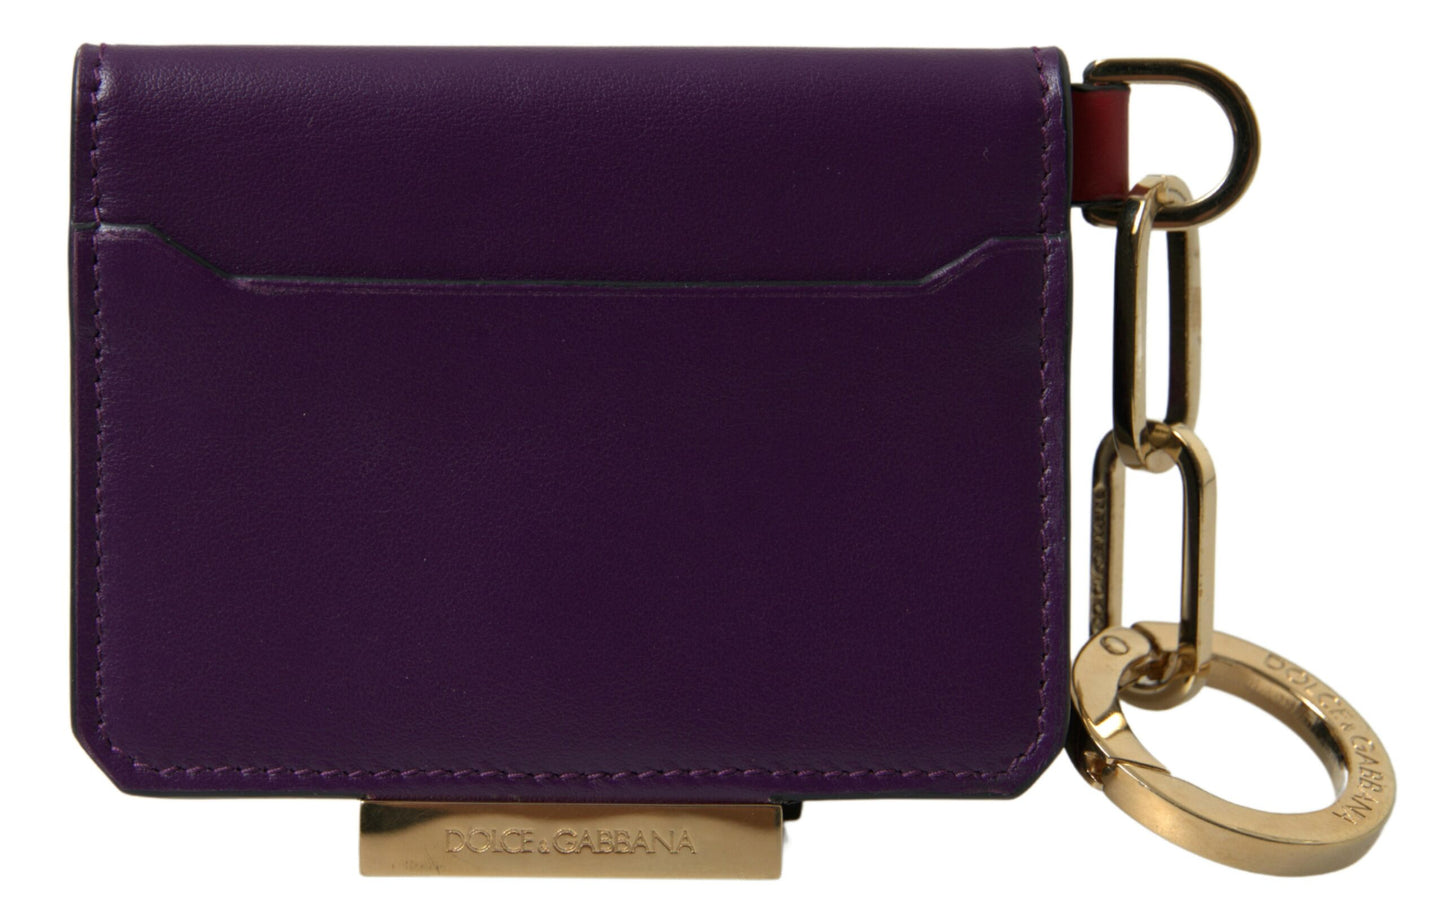 Dolce & Gabbana Purple Leather French Flap Wallet